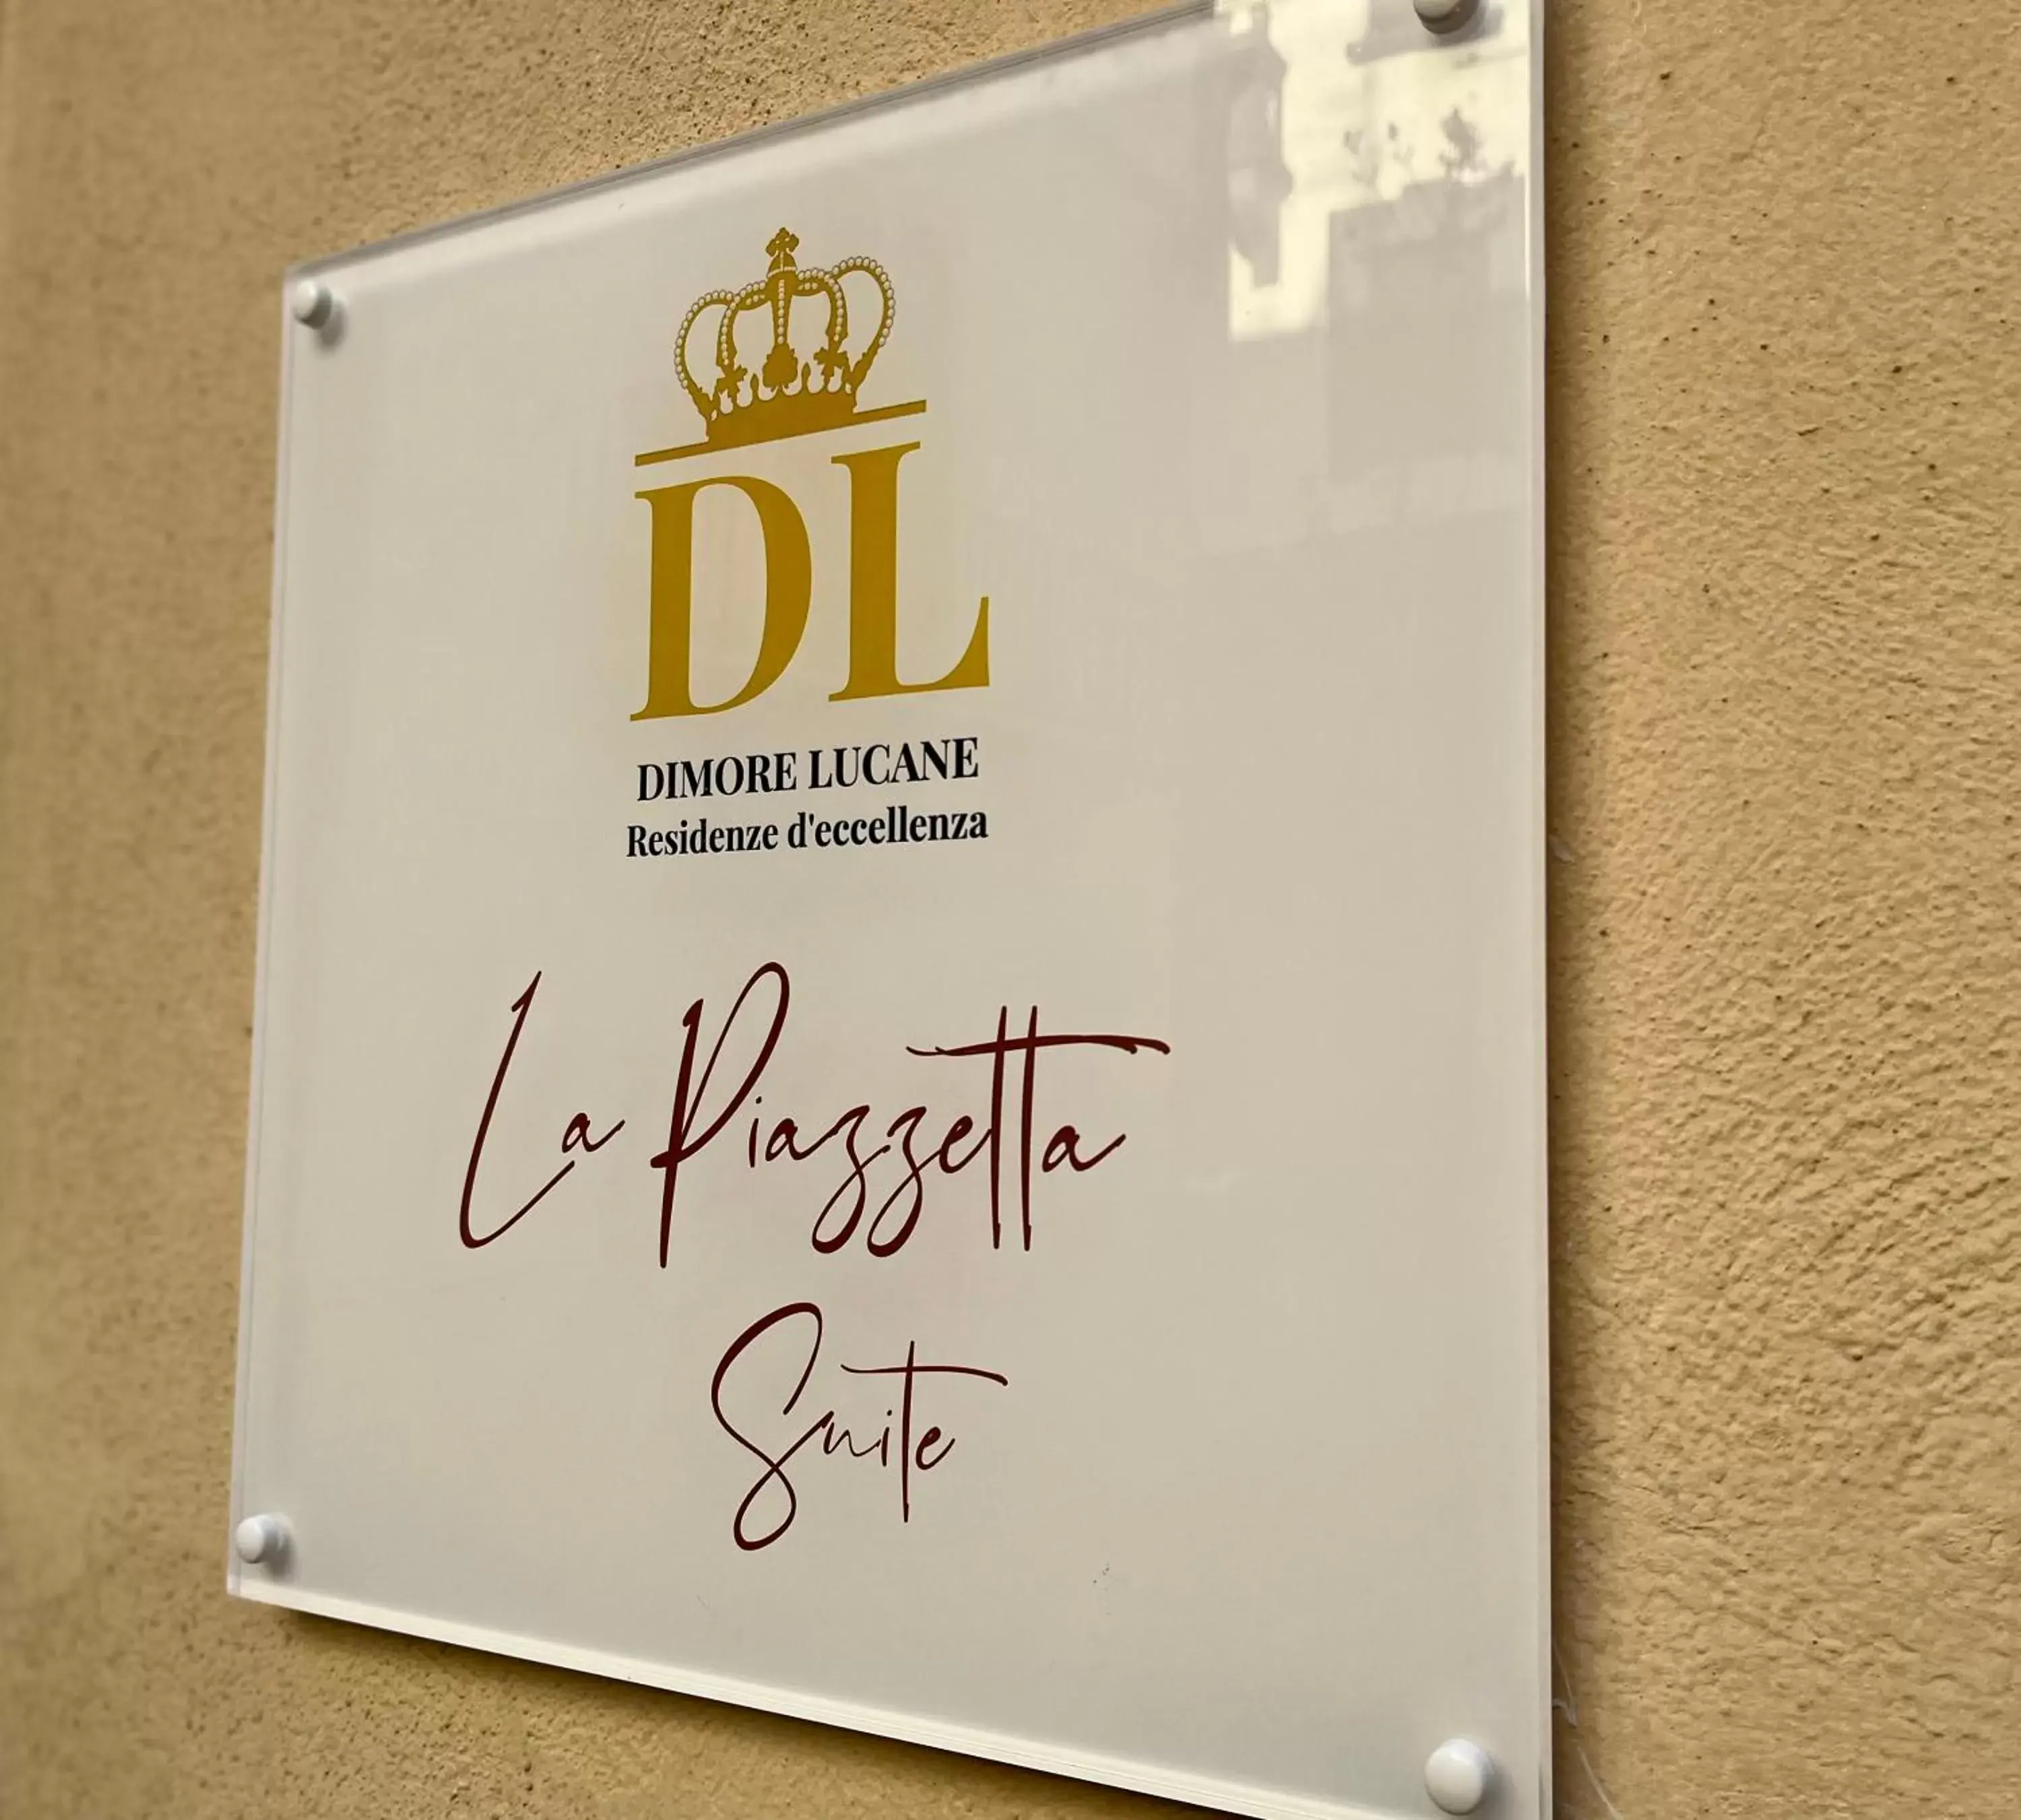 Property logo or sign in La Piazzetta Suite